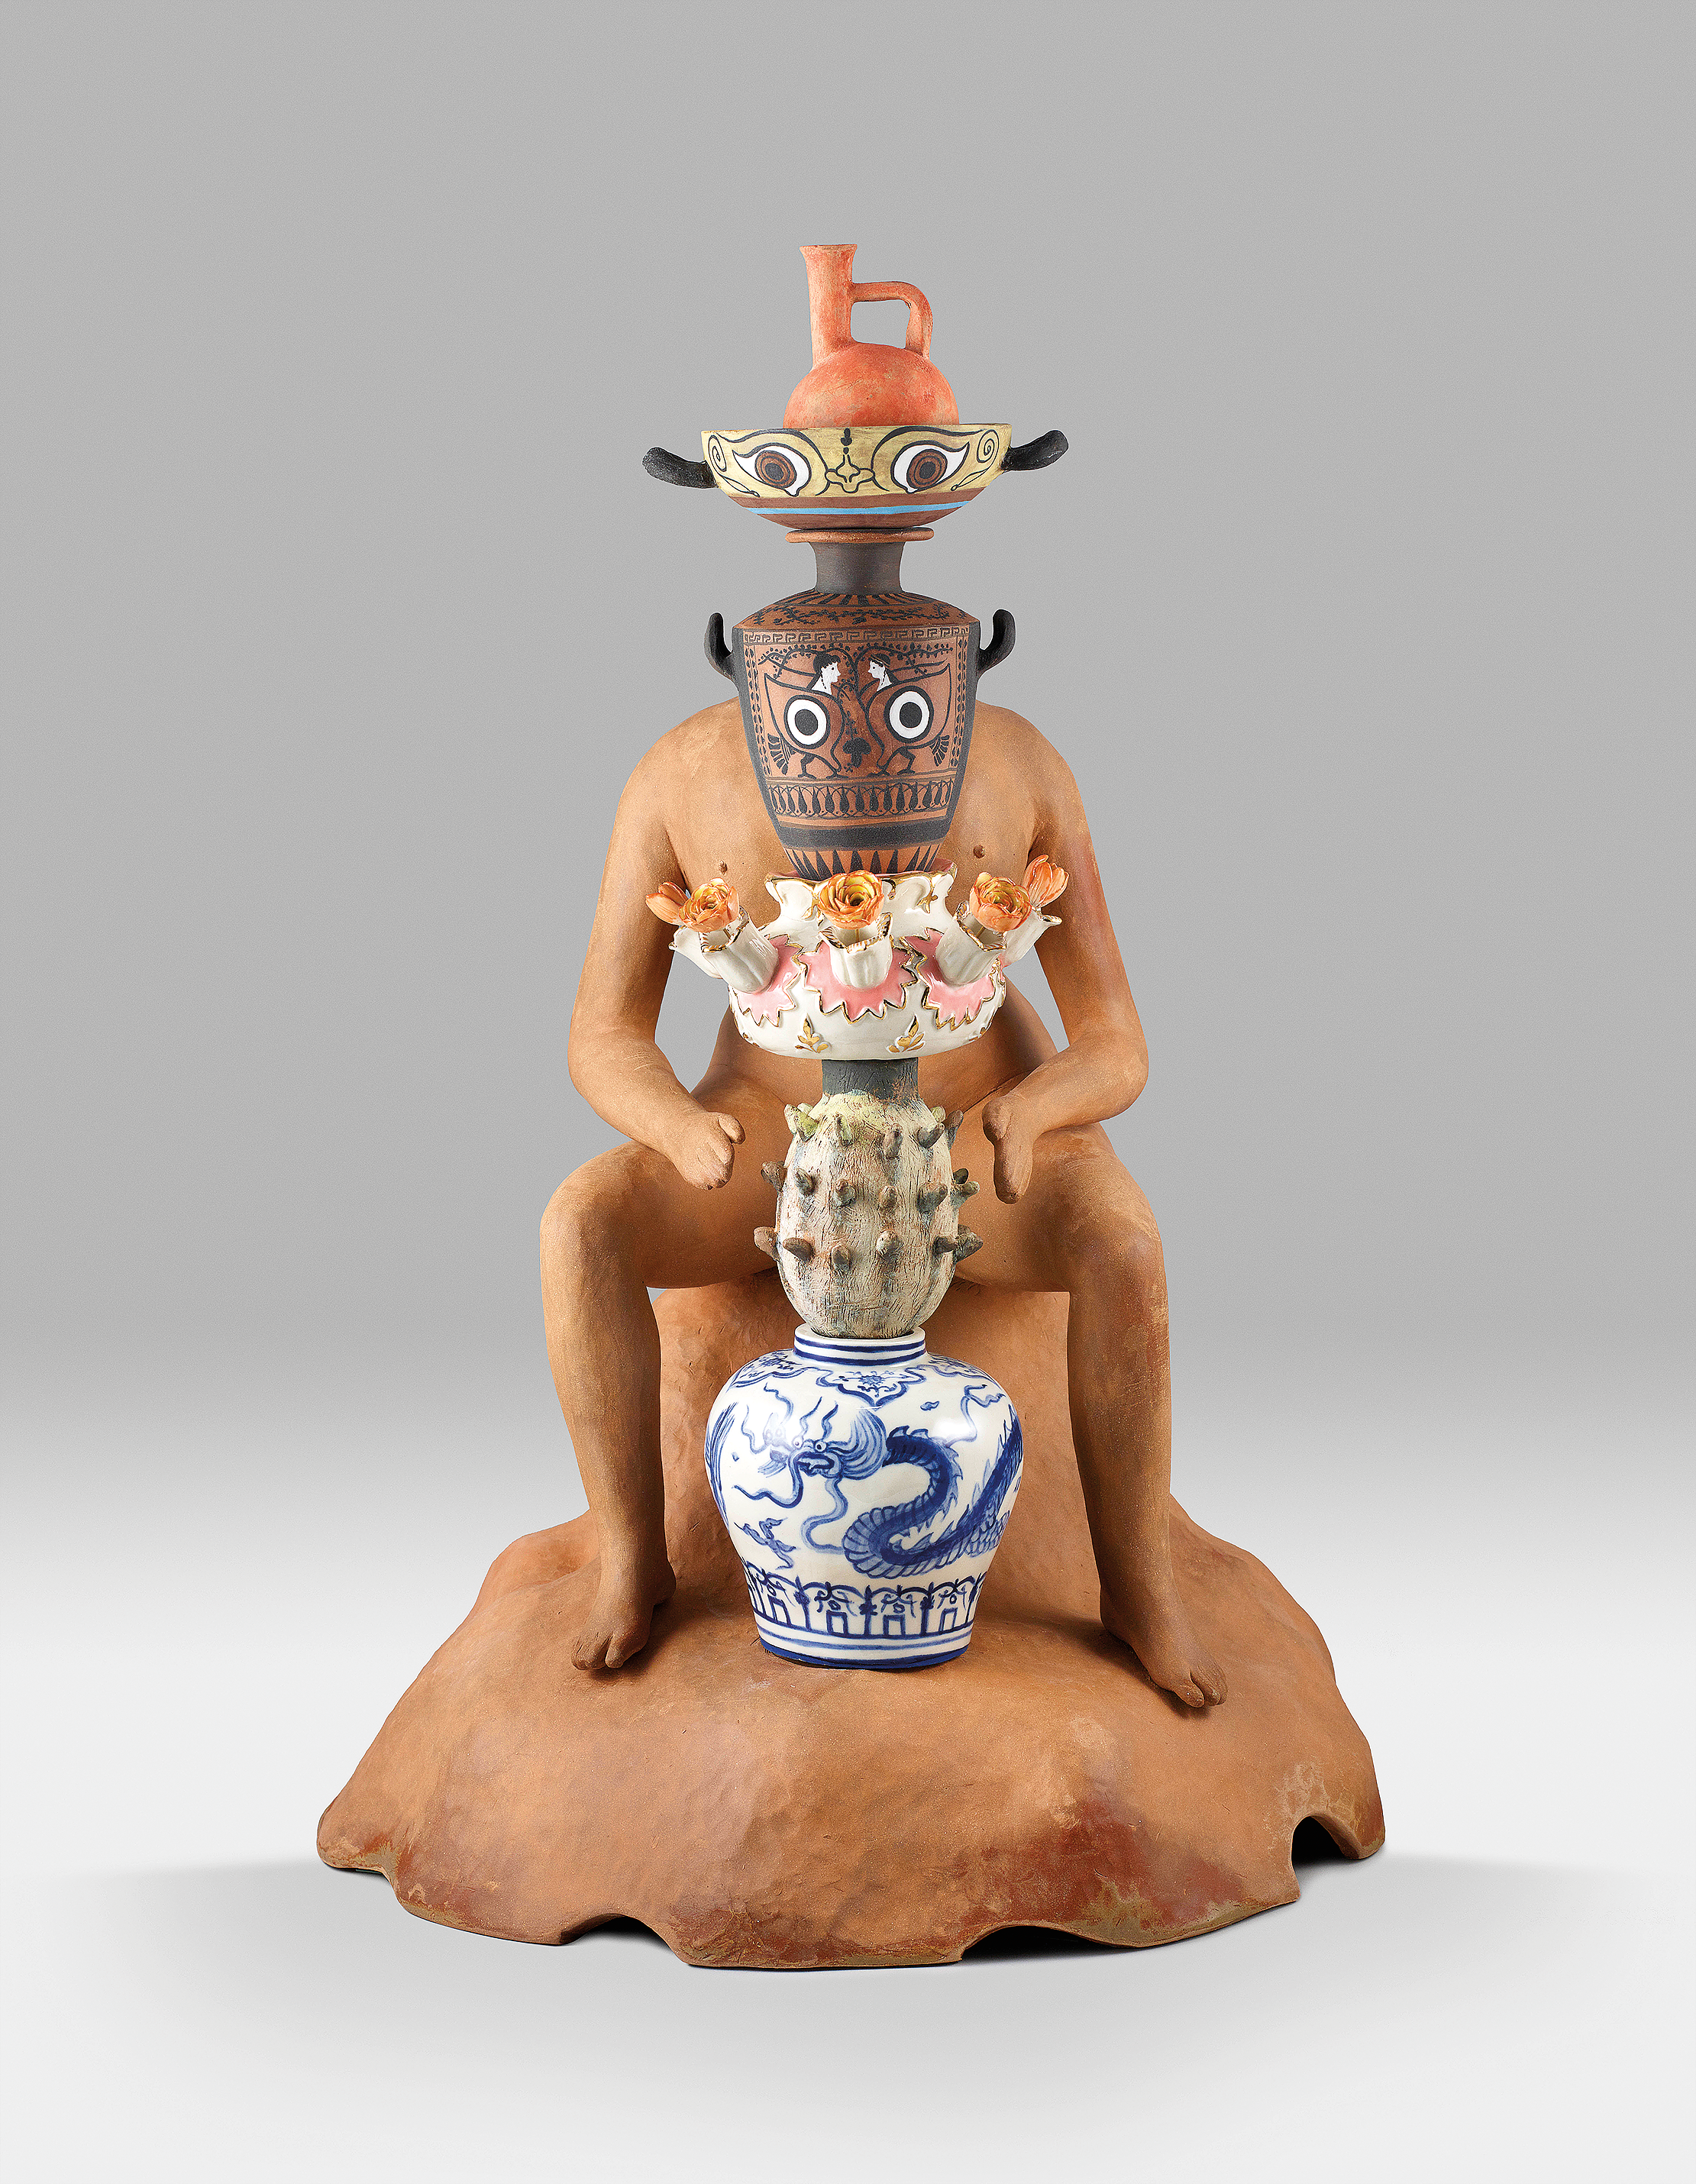 Shary Boyle, The Potter II, 2019, terracotta, porcelain, underglaze, china paint, lustre, brass rod, wood dowel, 58 x 40 x 40 cm. Courtesy of the Museum of Fine Arts, Montreal, Purchase, Suzanne Caouette Bequest, in tribute. Photo by John Jones, courtesy of the artist and Patel Brown Gallery.